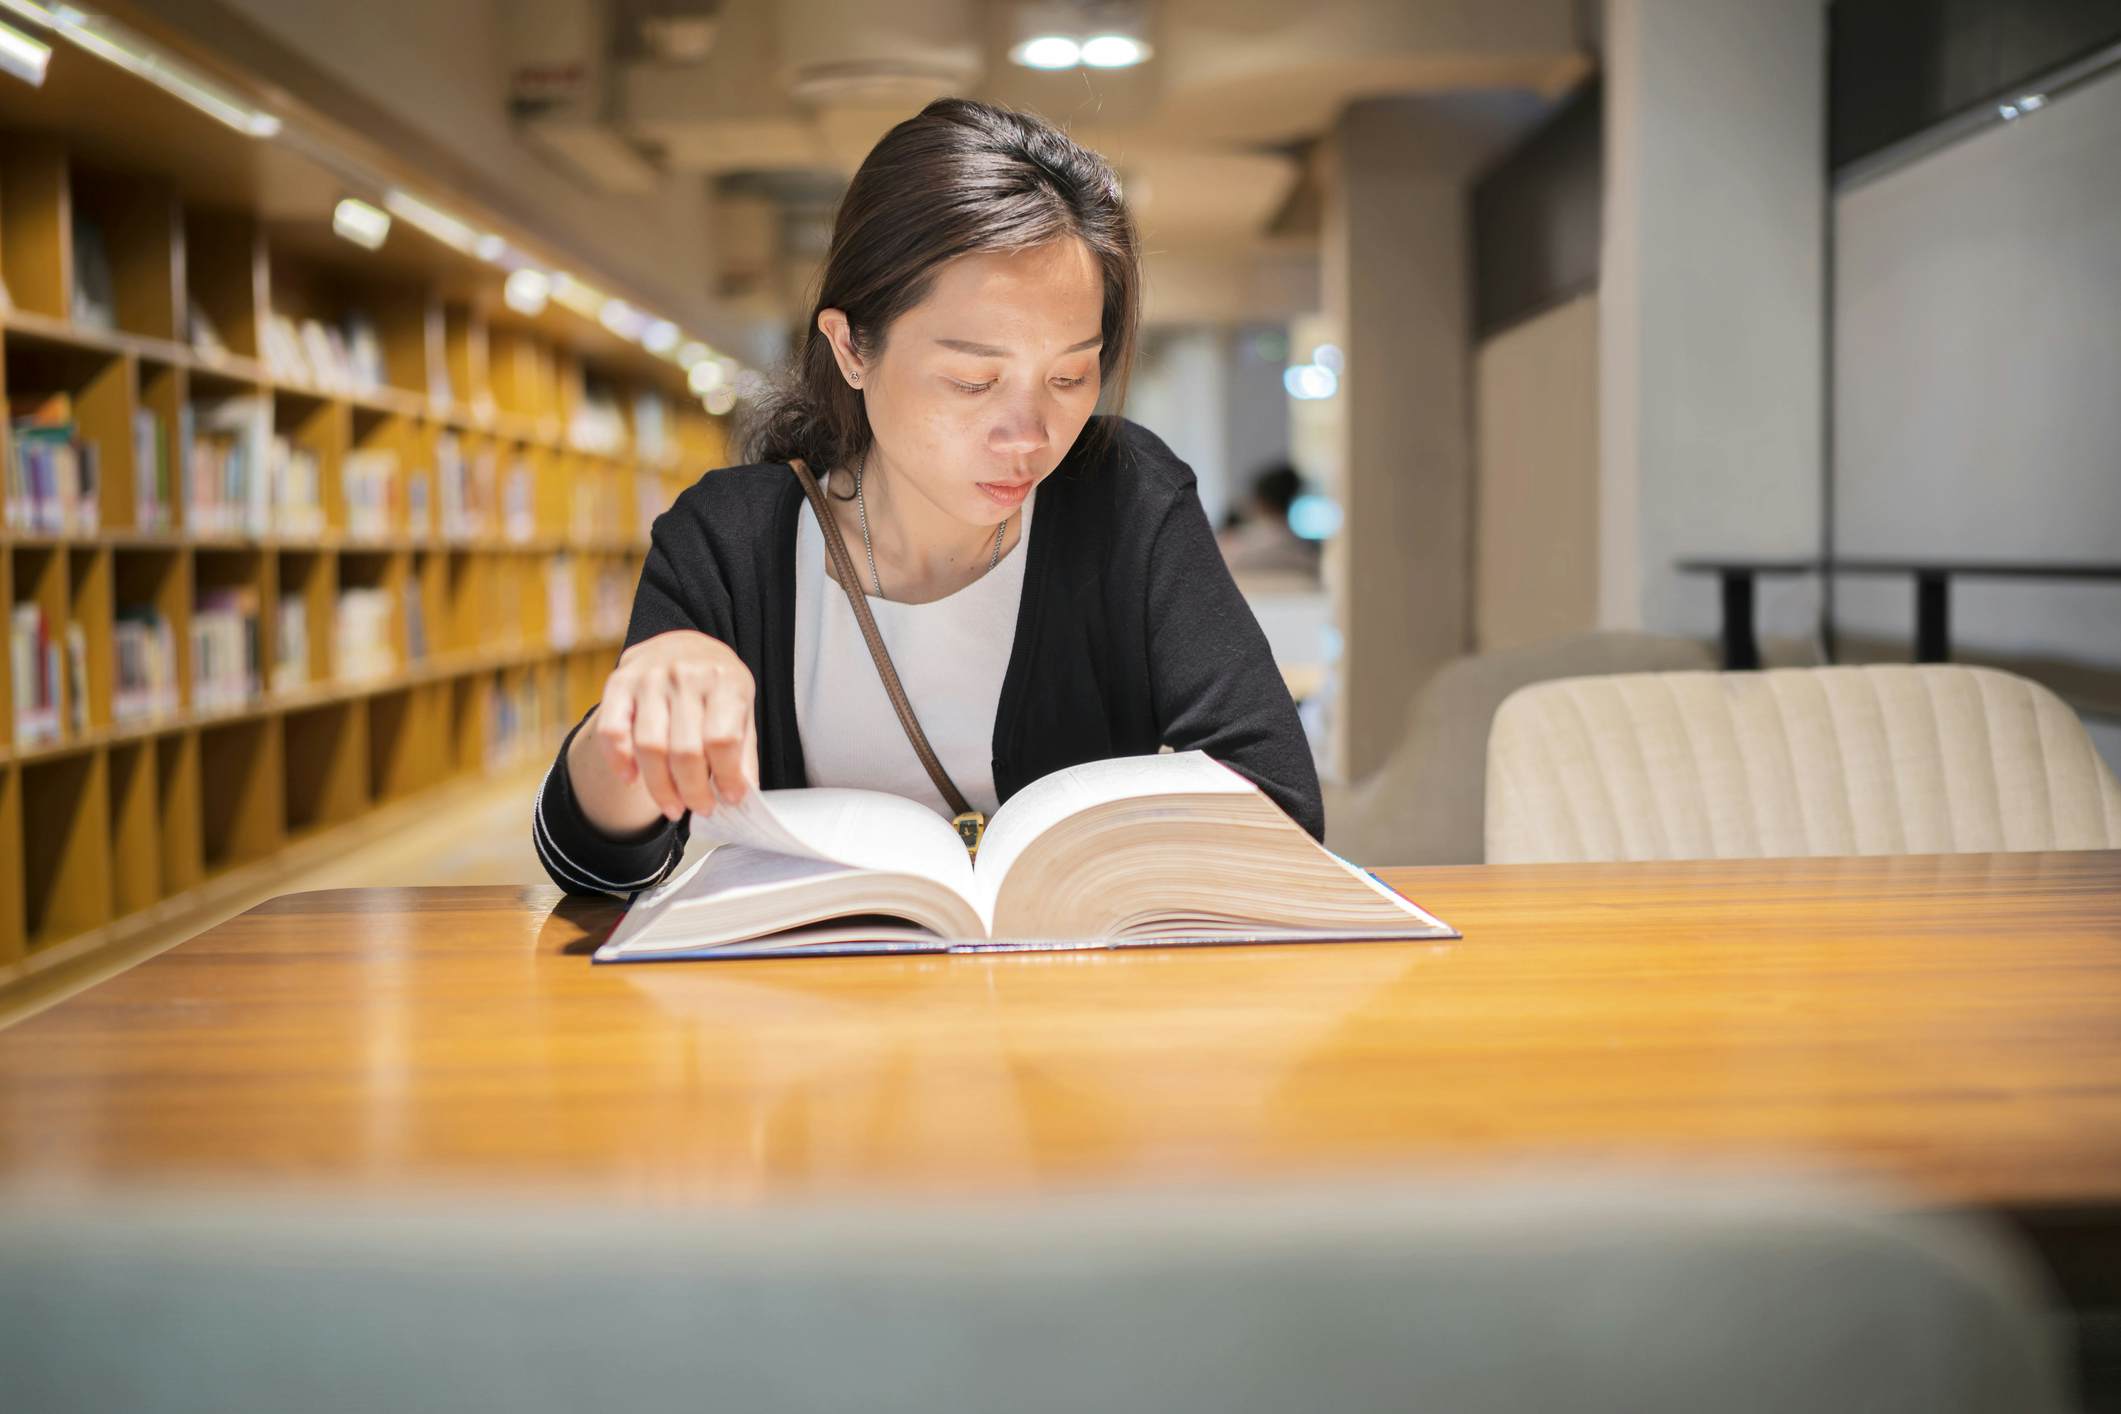 Student reading a law textbook in a library